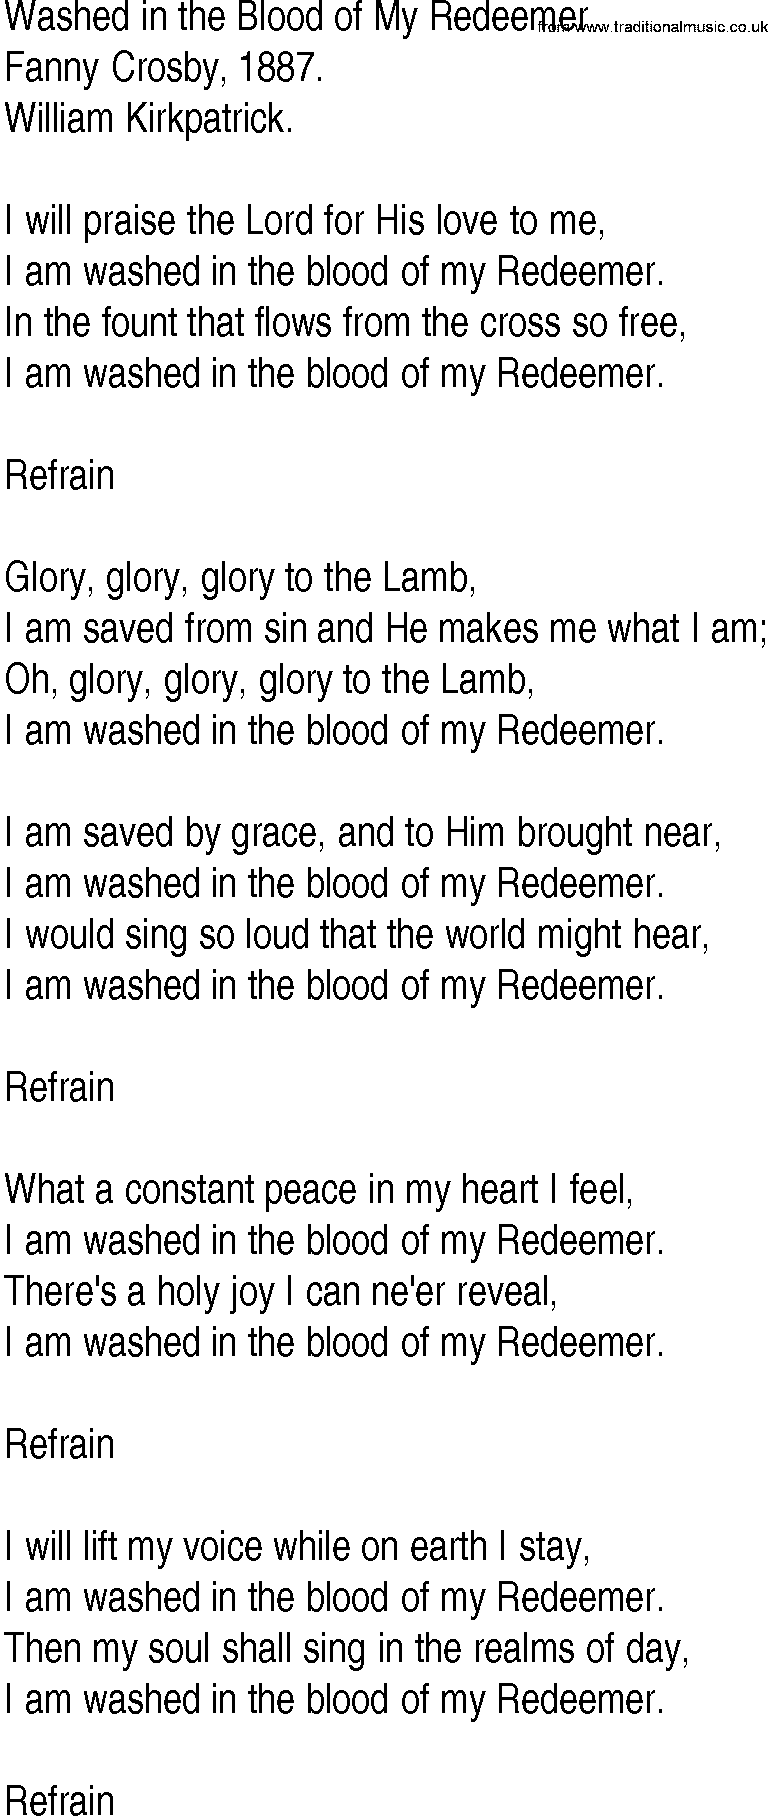 Hymn and Gospel Song: Washed in the Blood of My Redeemer by Fanny Crosby lyrics